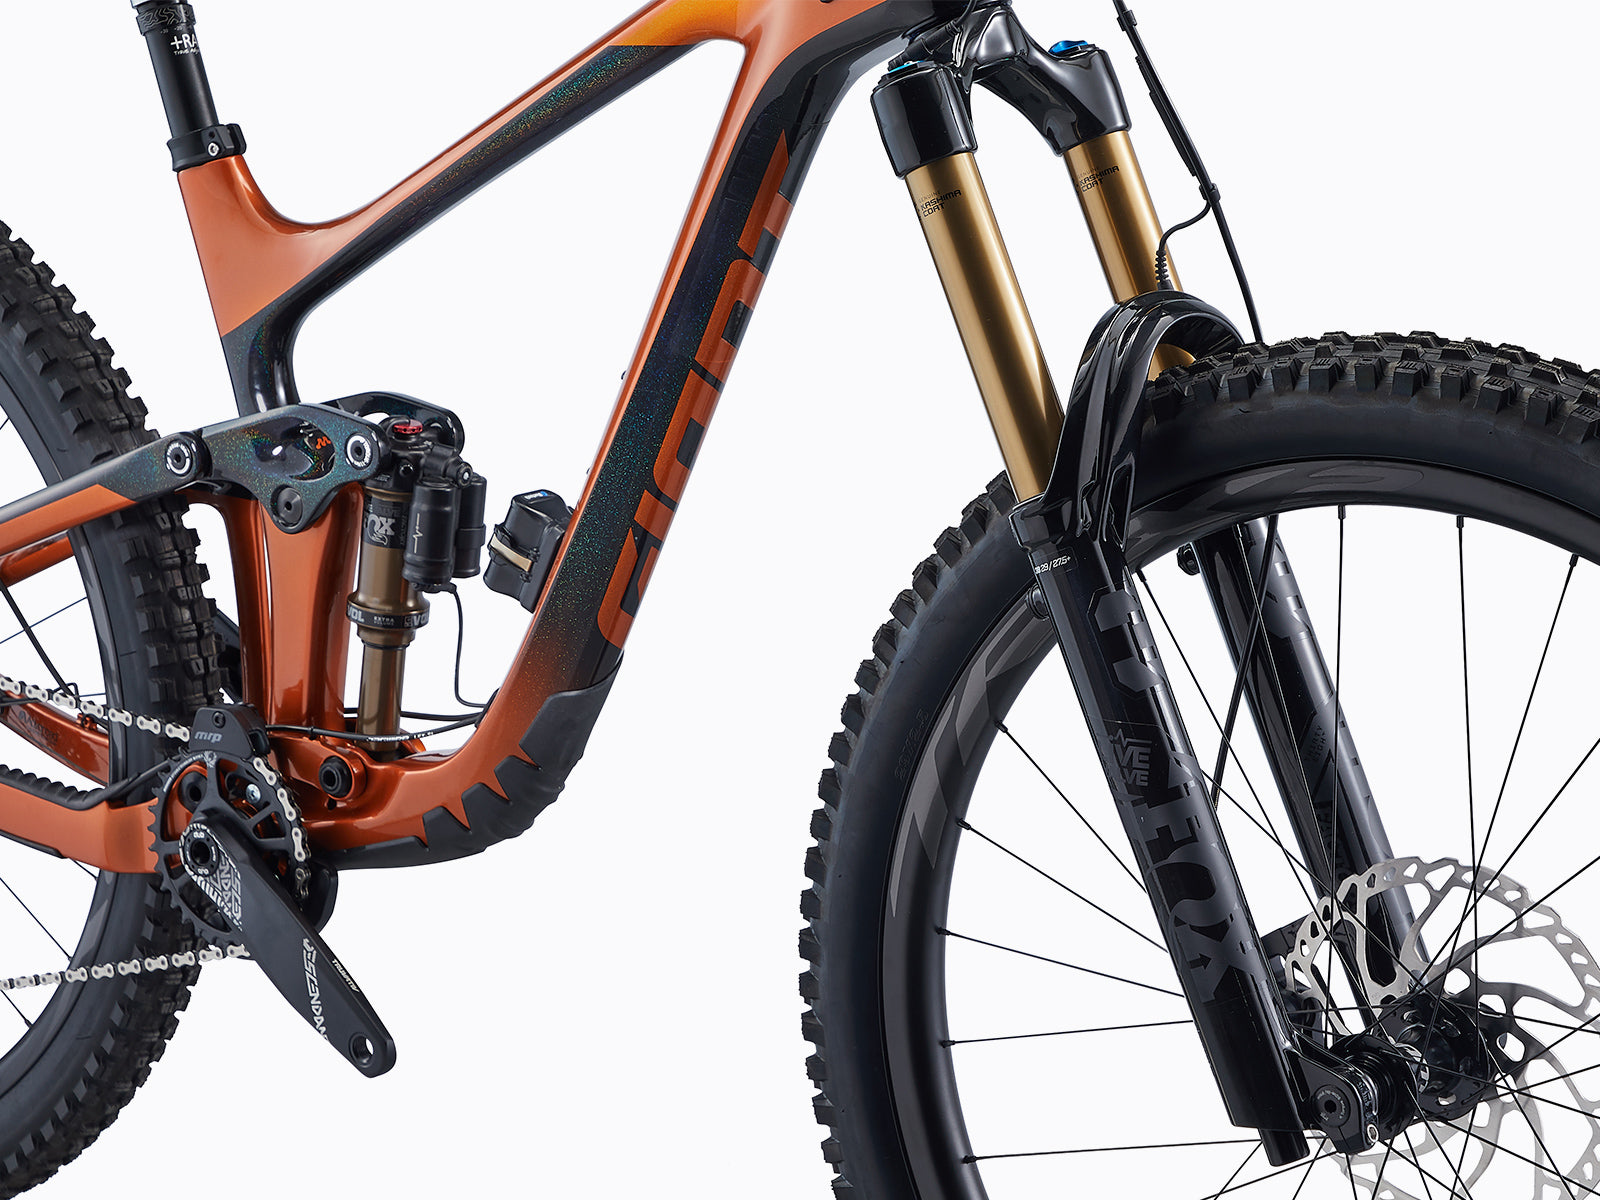 Image shows, giant reign advanced pro 29 1, a mountain bike from Giant now sold at Giant Melbourne